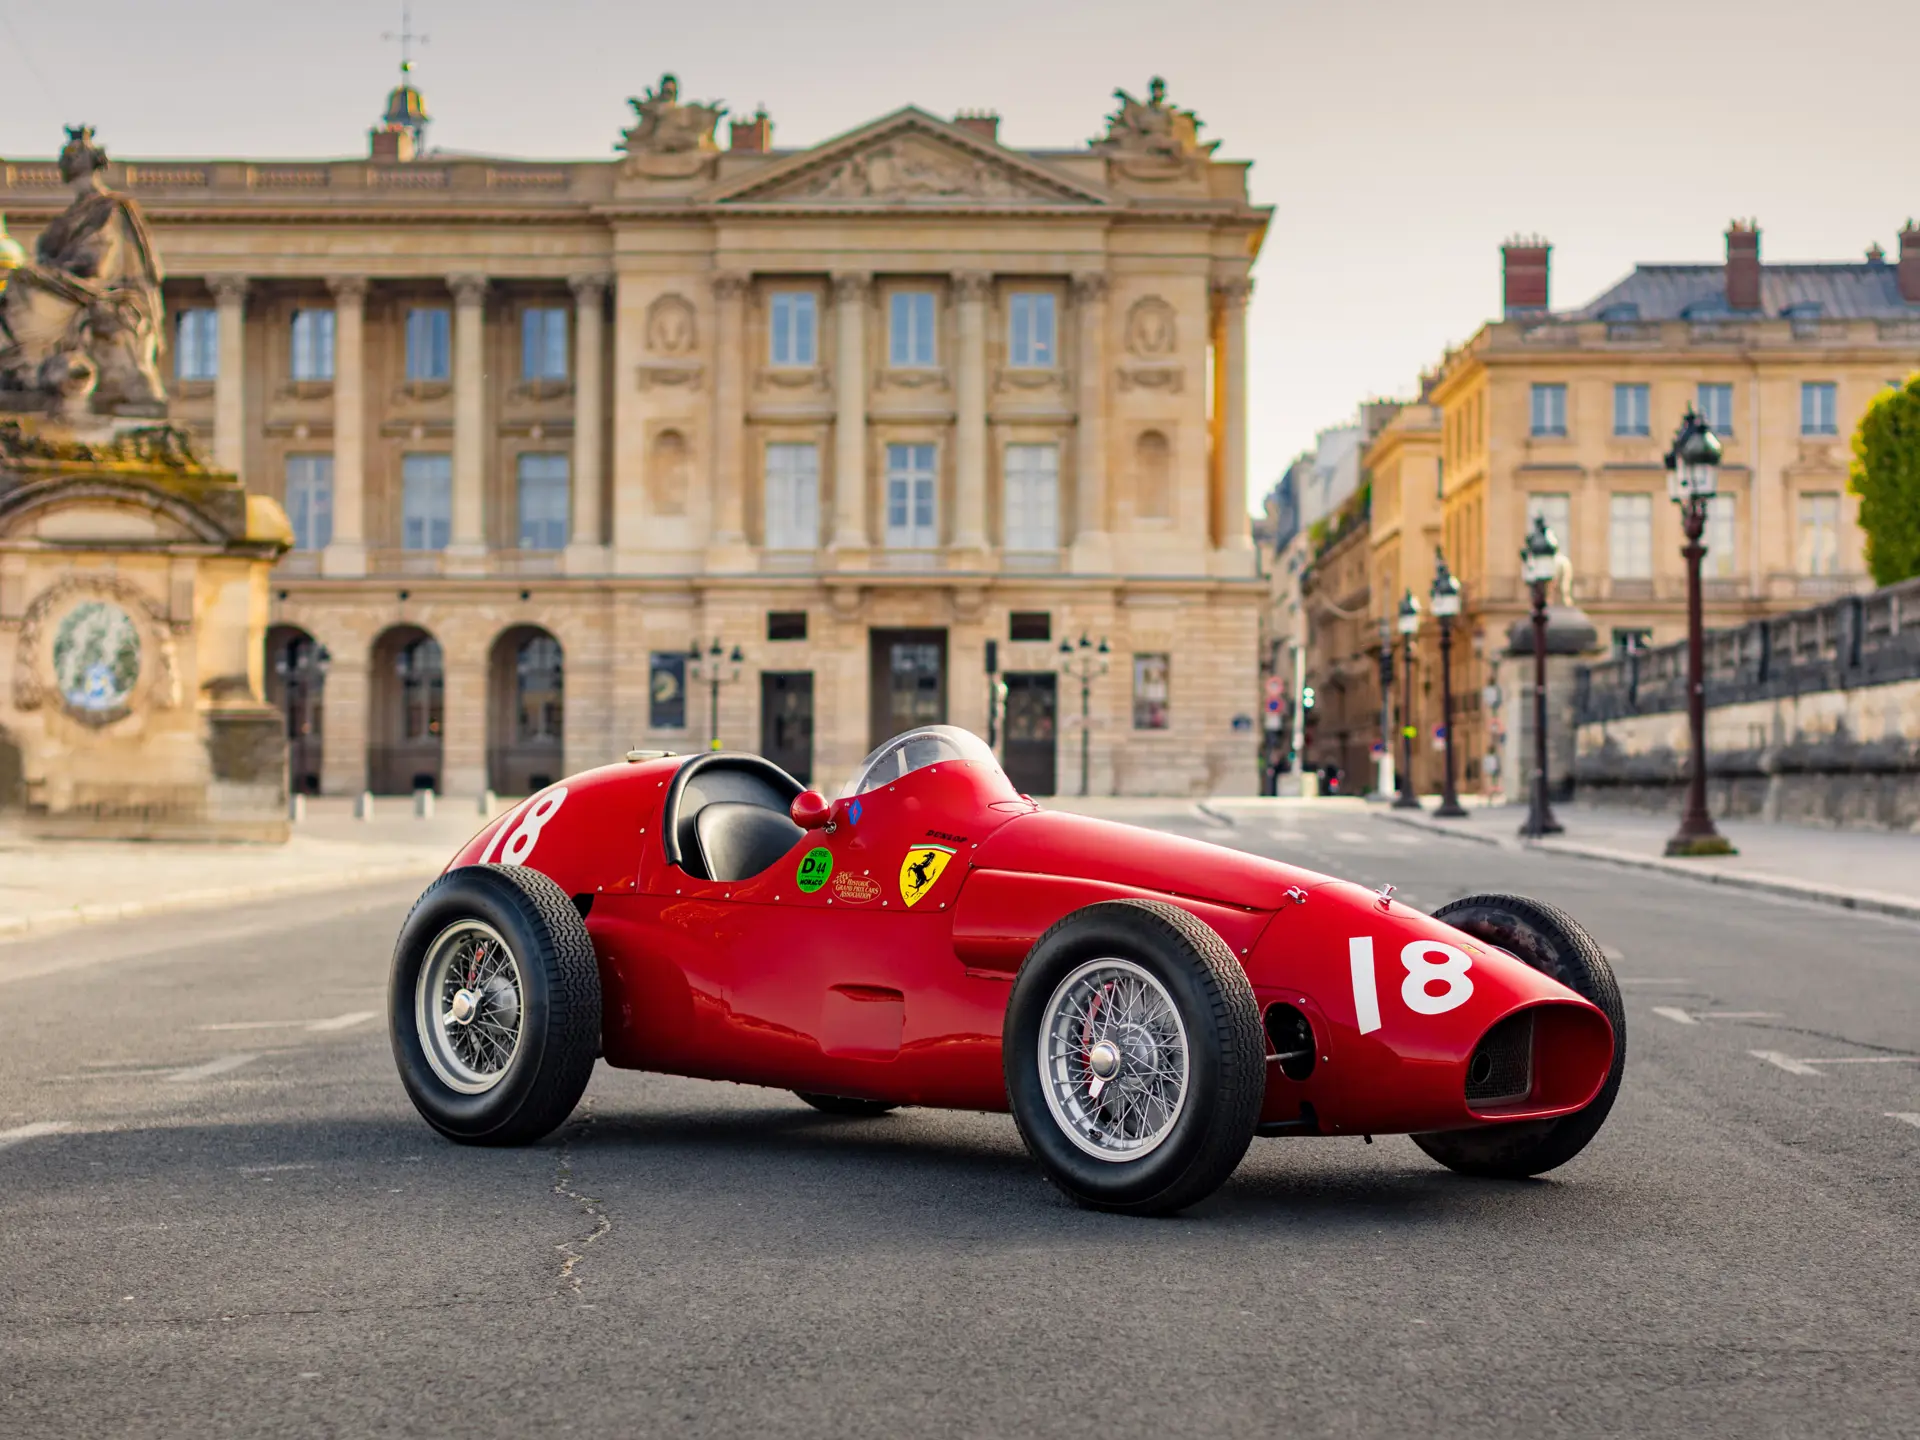 Iconic 1954 Ferrari 625 F1 for auction at RM Sotheby's